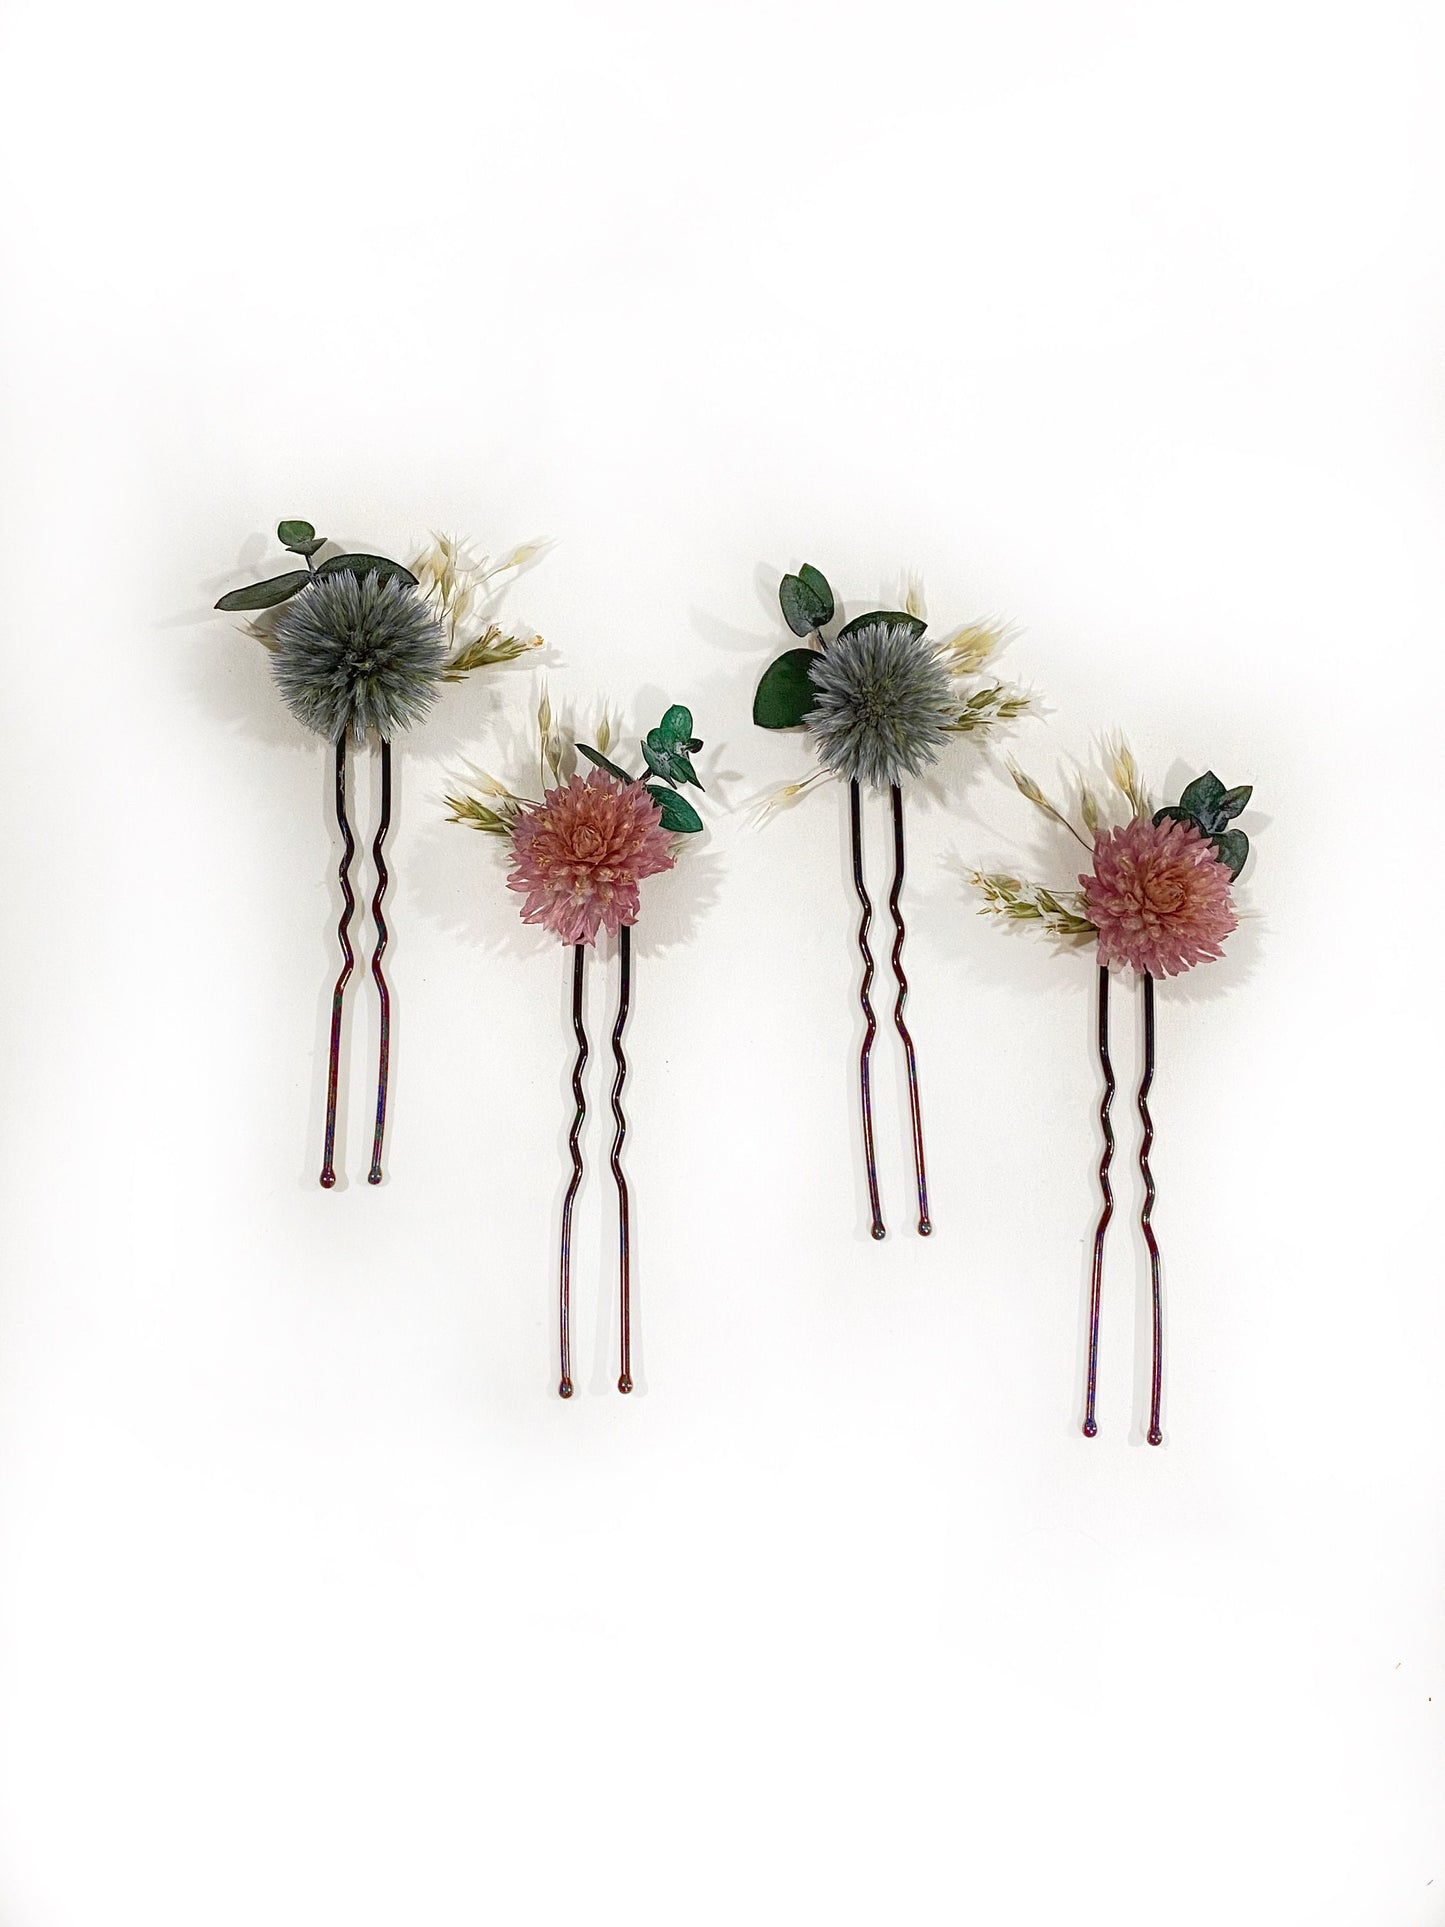 Hair Comb, Dried flowers, Preserved flowers, Floral comb, Hair accessories, Wedding accessory, Globe thistles, Winter, Pink and Blue, Peony